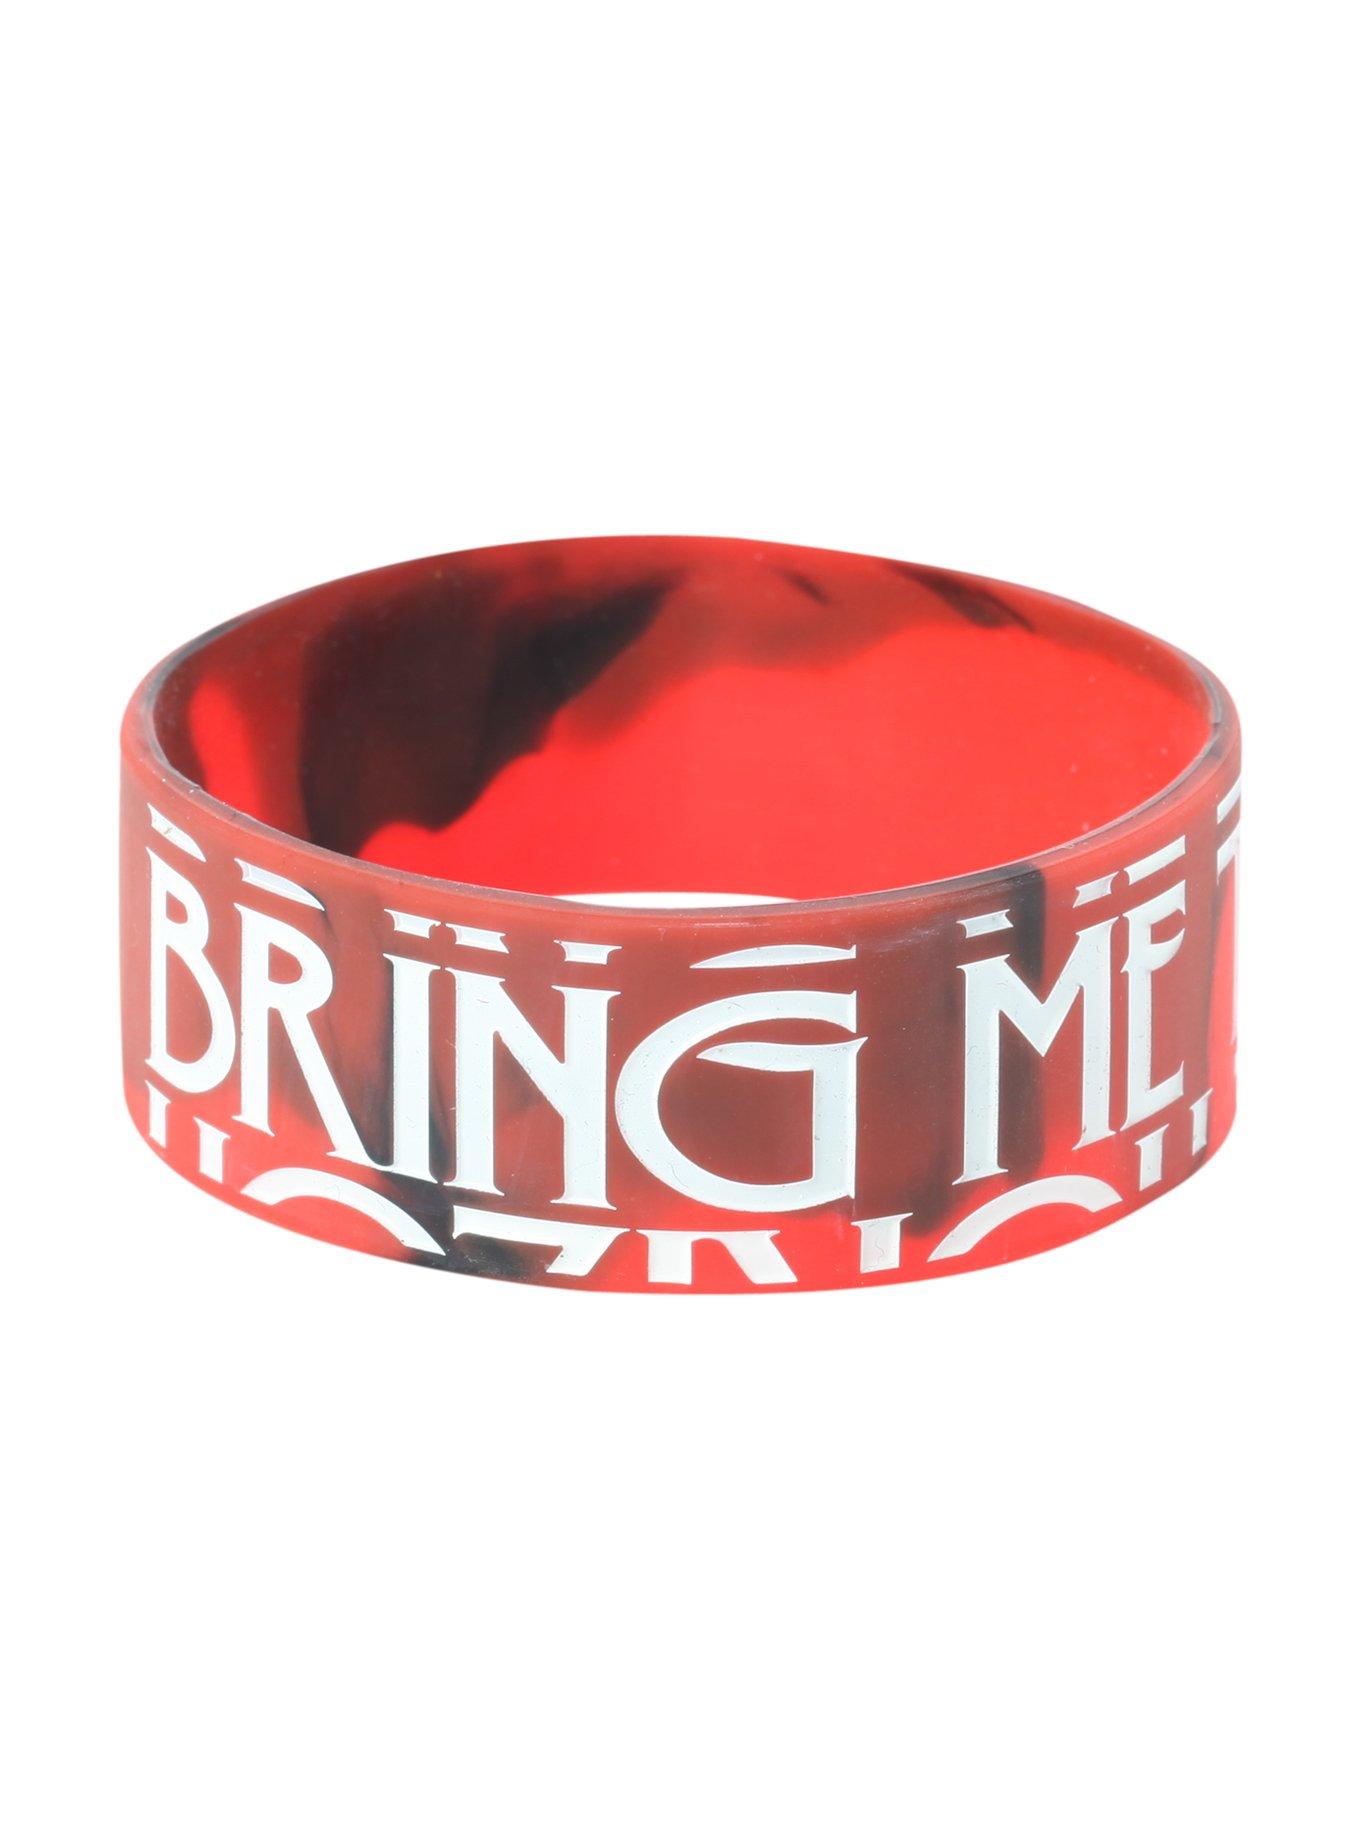 Bring Me The Horizon Red And White Rubber Bracelet | Hot Topic